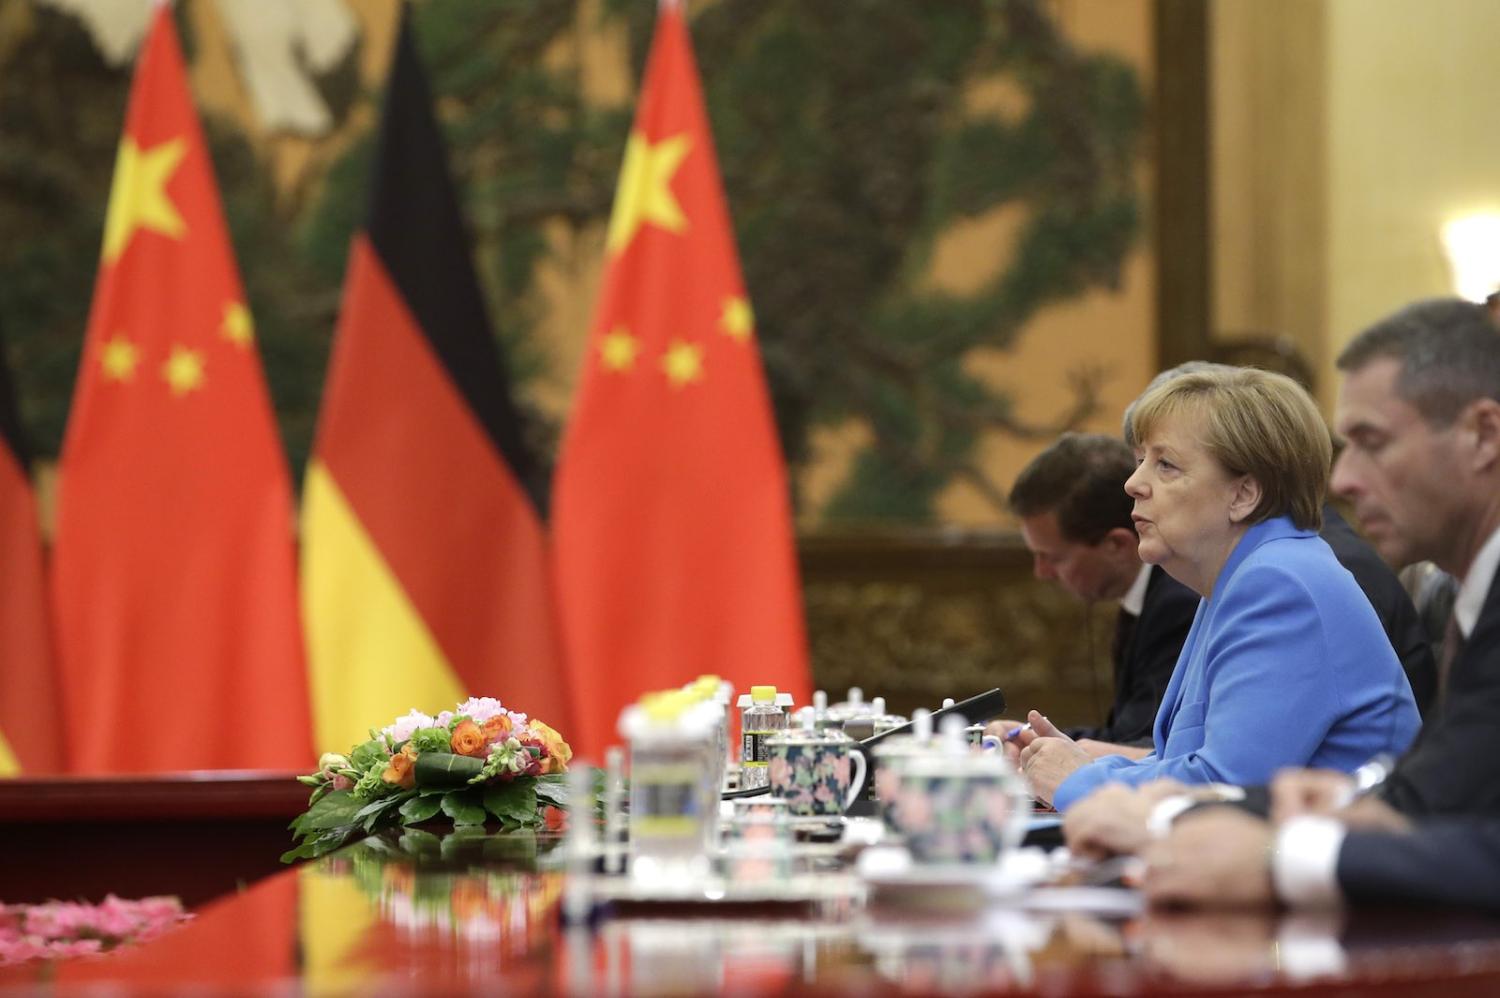 German Chancellor Angela Merkel at the Great Hall of the People in Beijing, China (Photo: Jason Lee via Getty)